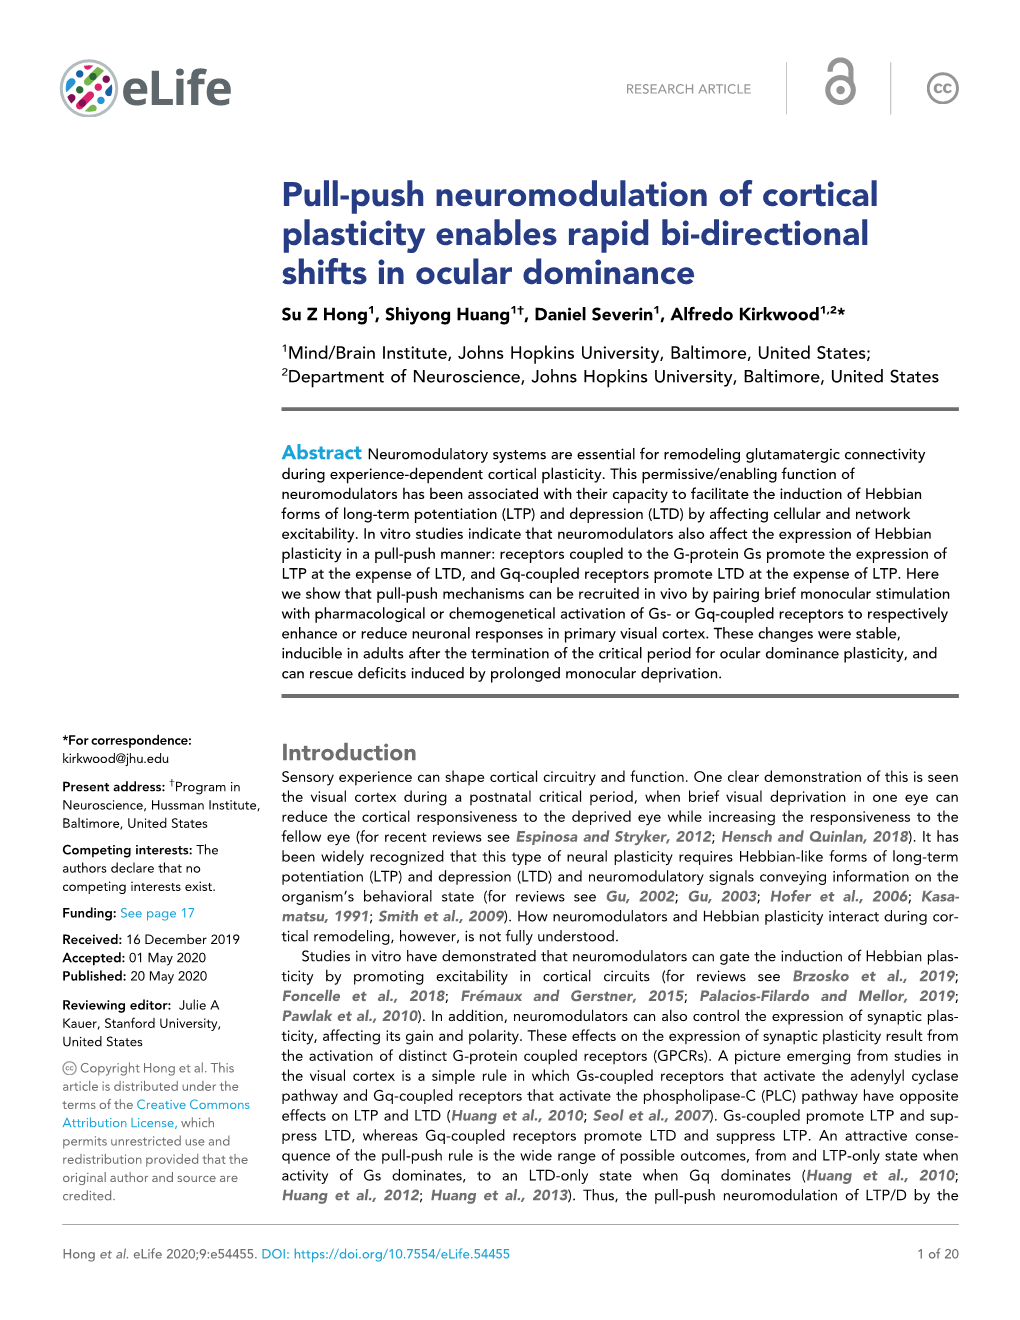 Pull-Push Neuromodulation of Cortical Plasticity Enables Rapid Bi